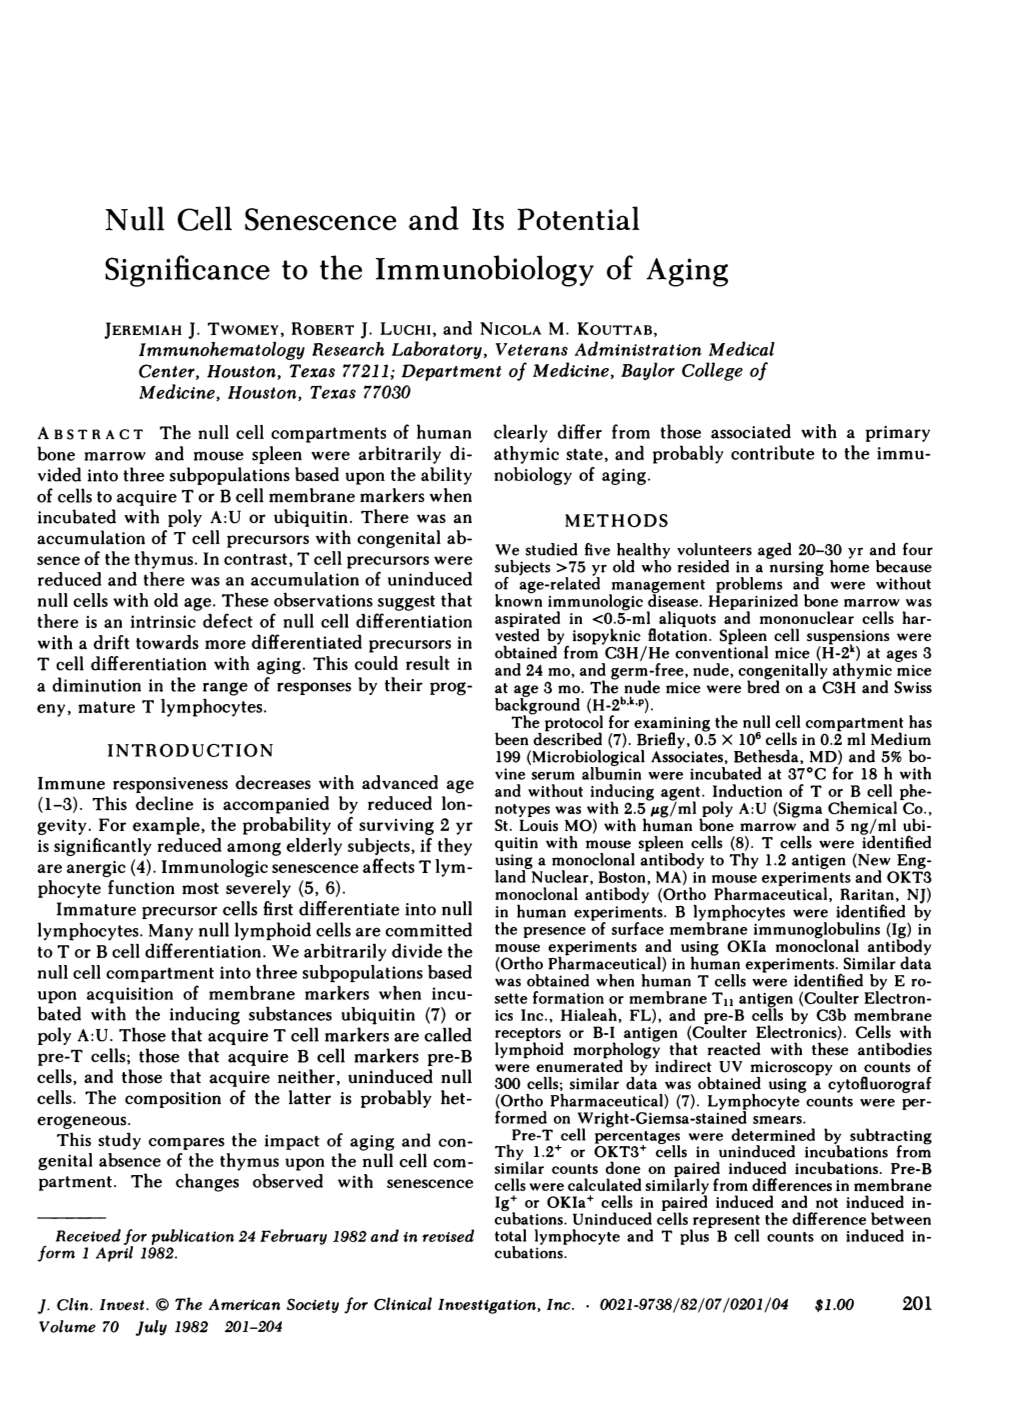 Null Cell Senescence and Its Potential Significance to the Immunobiology of Aging